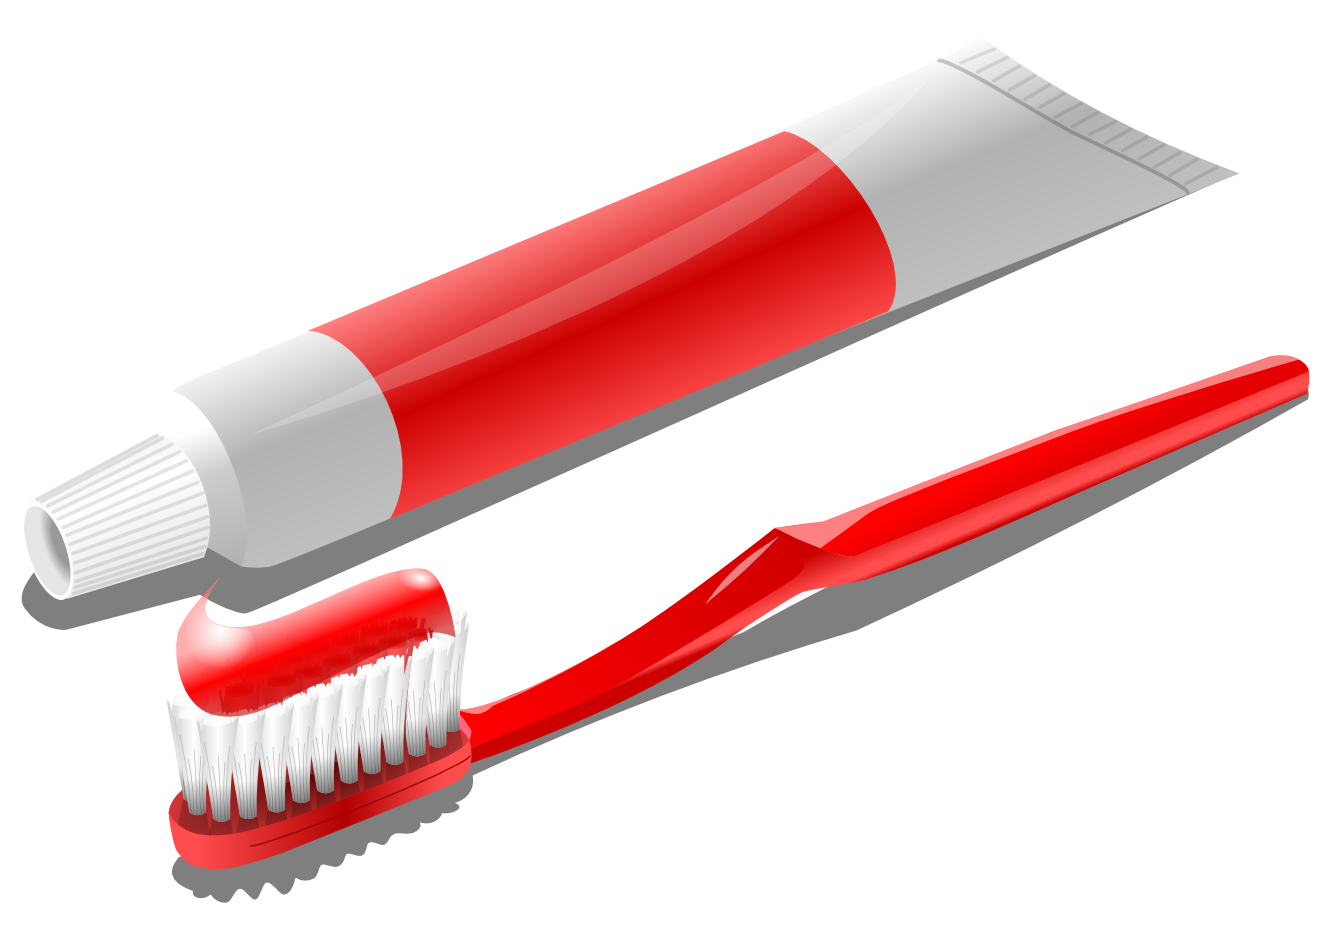 Toothbrush with Toothpaste 2 toothbrush 3 SVG - ClipArt Best ...